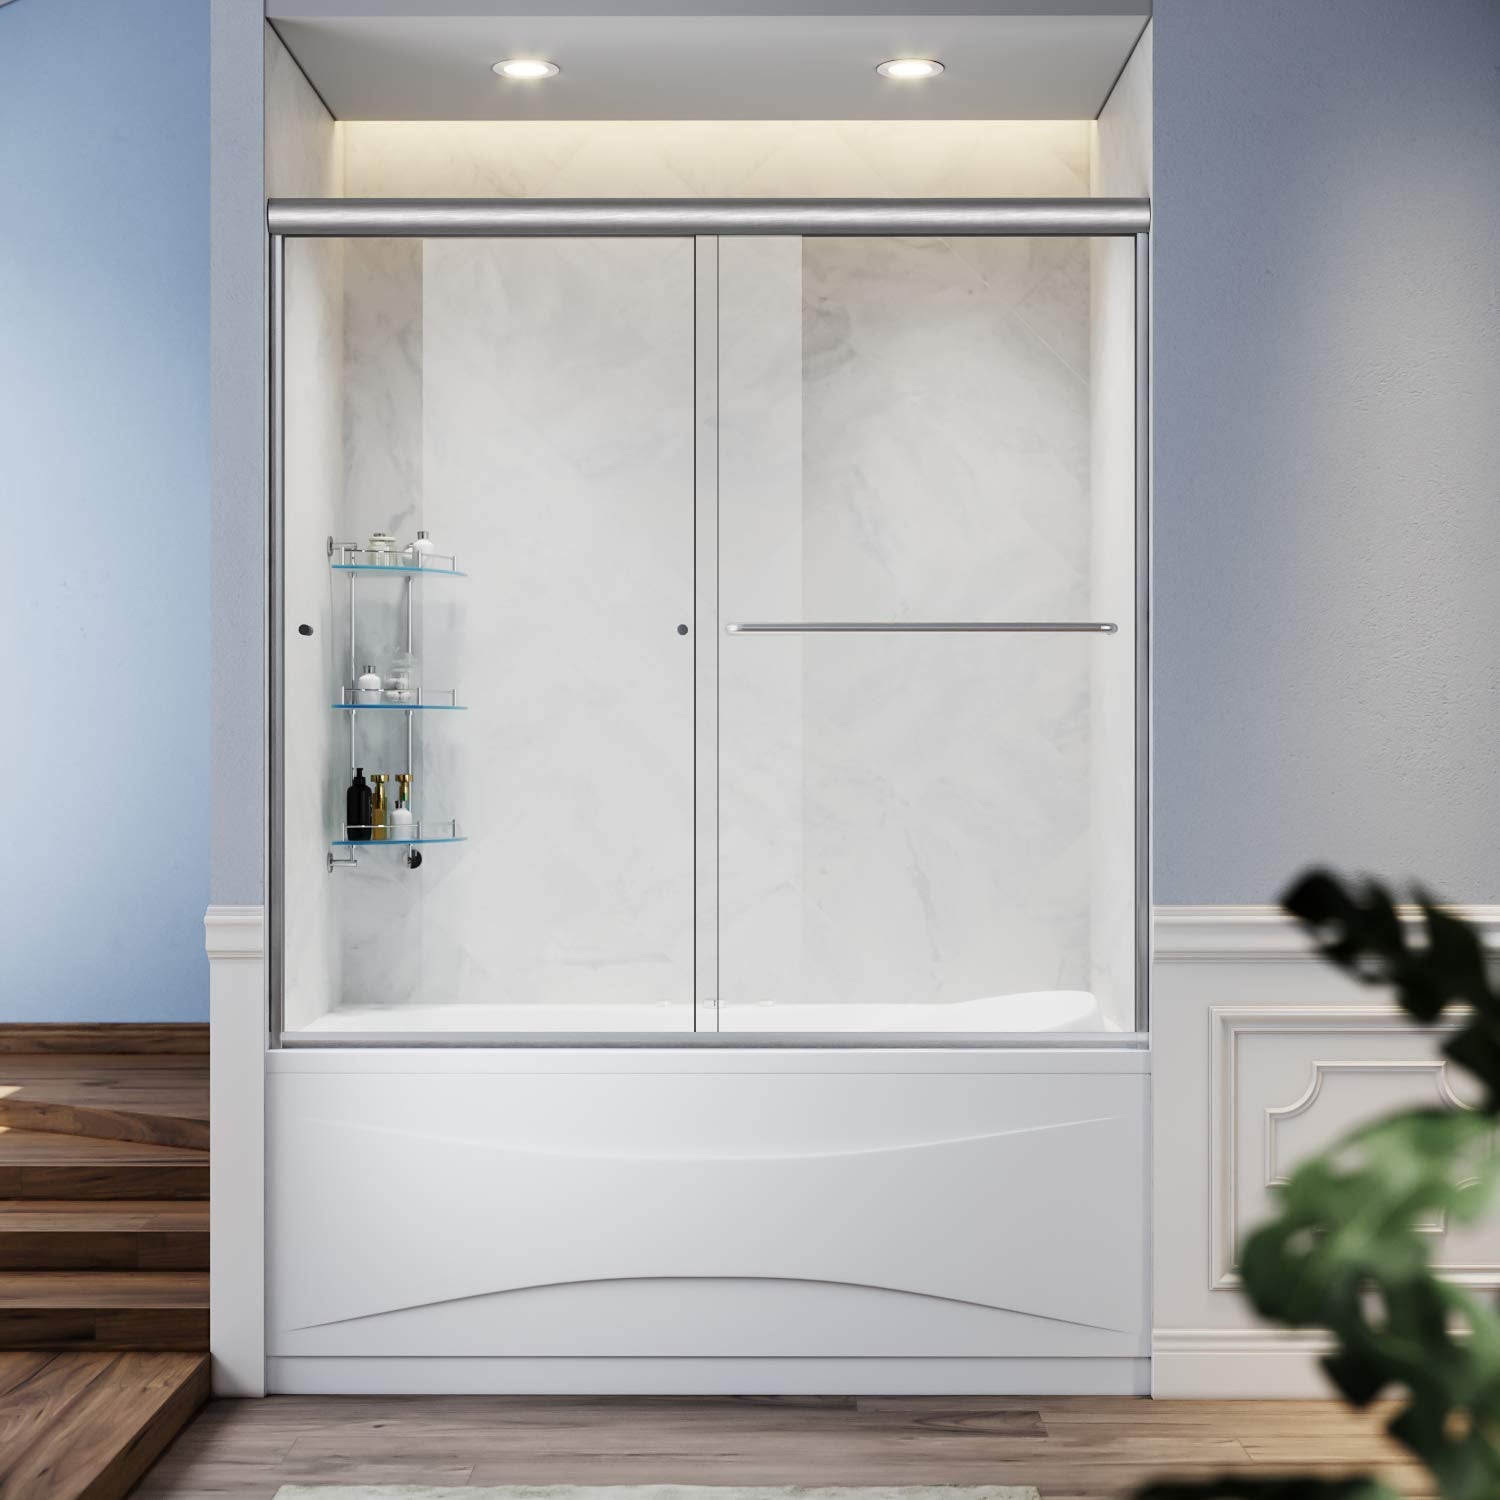 SUNNY SHOWER 60 in. W x 62 in. H Brushed Nicke Finish Bathtub Double Sliding Doors